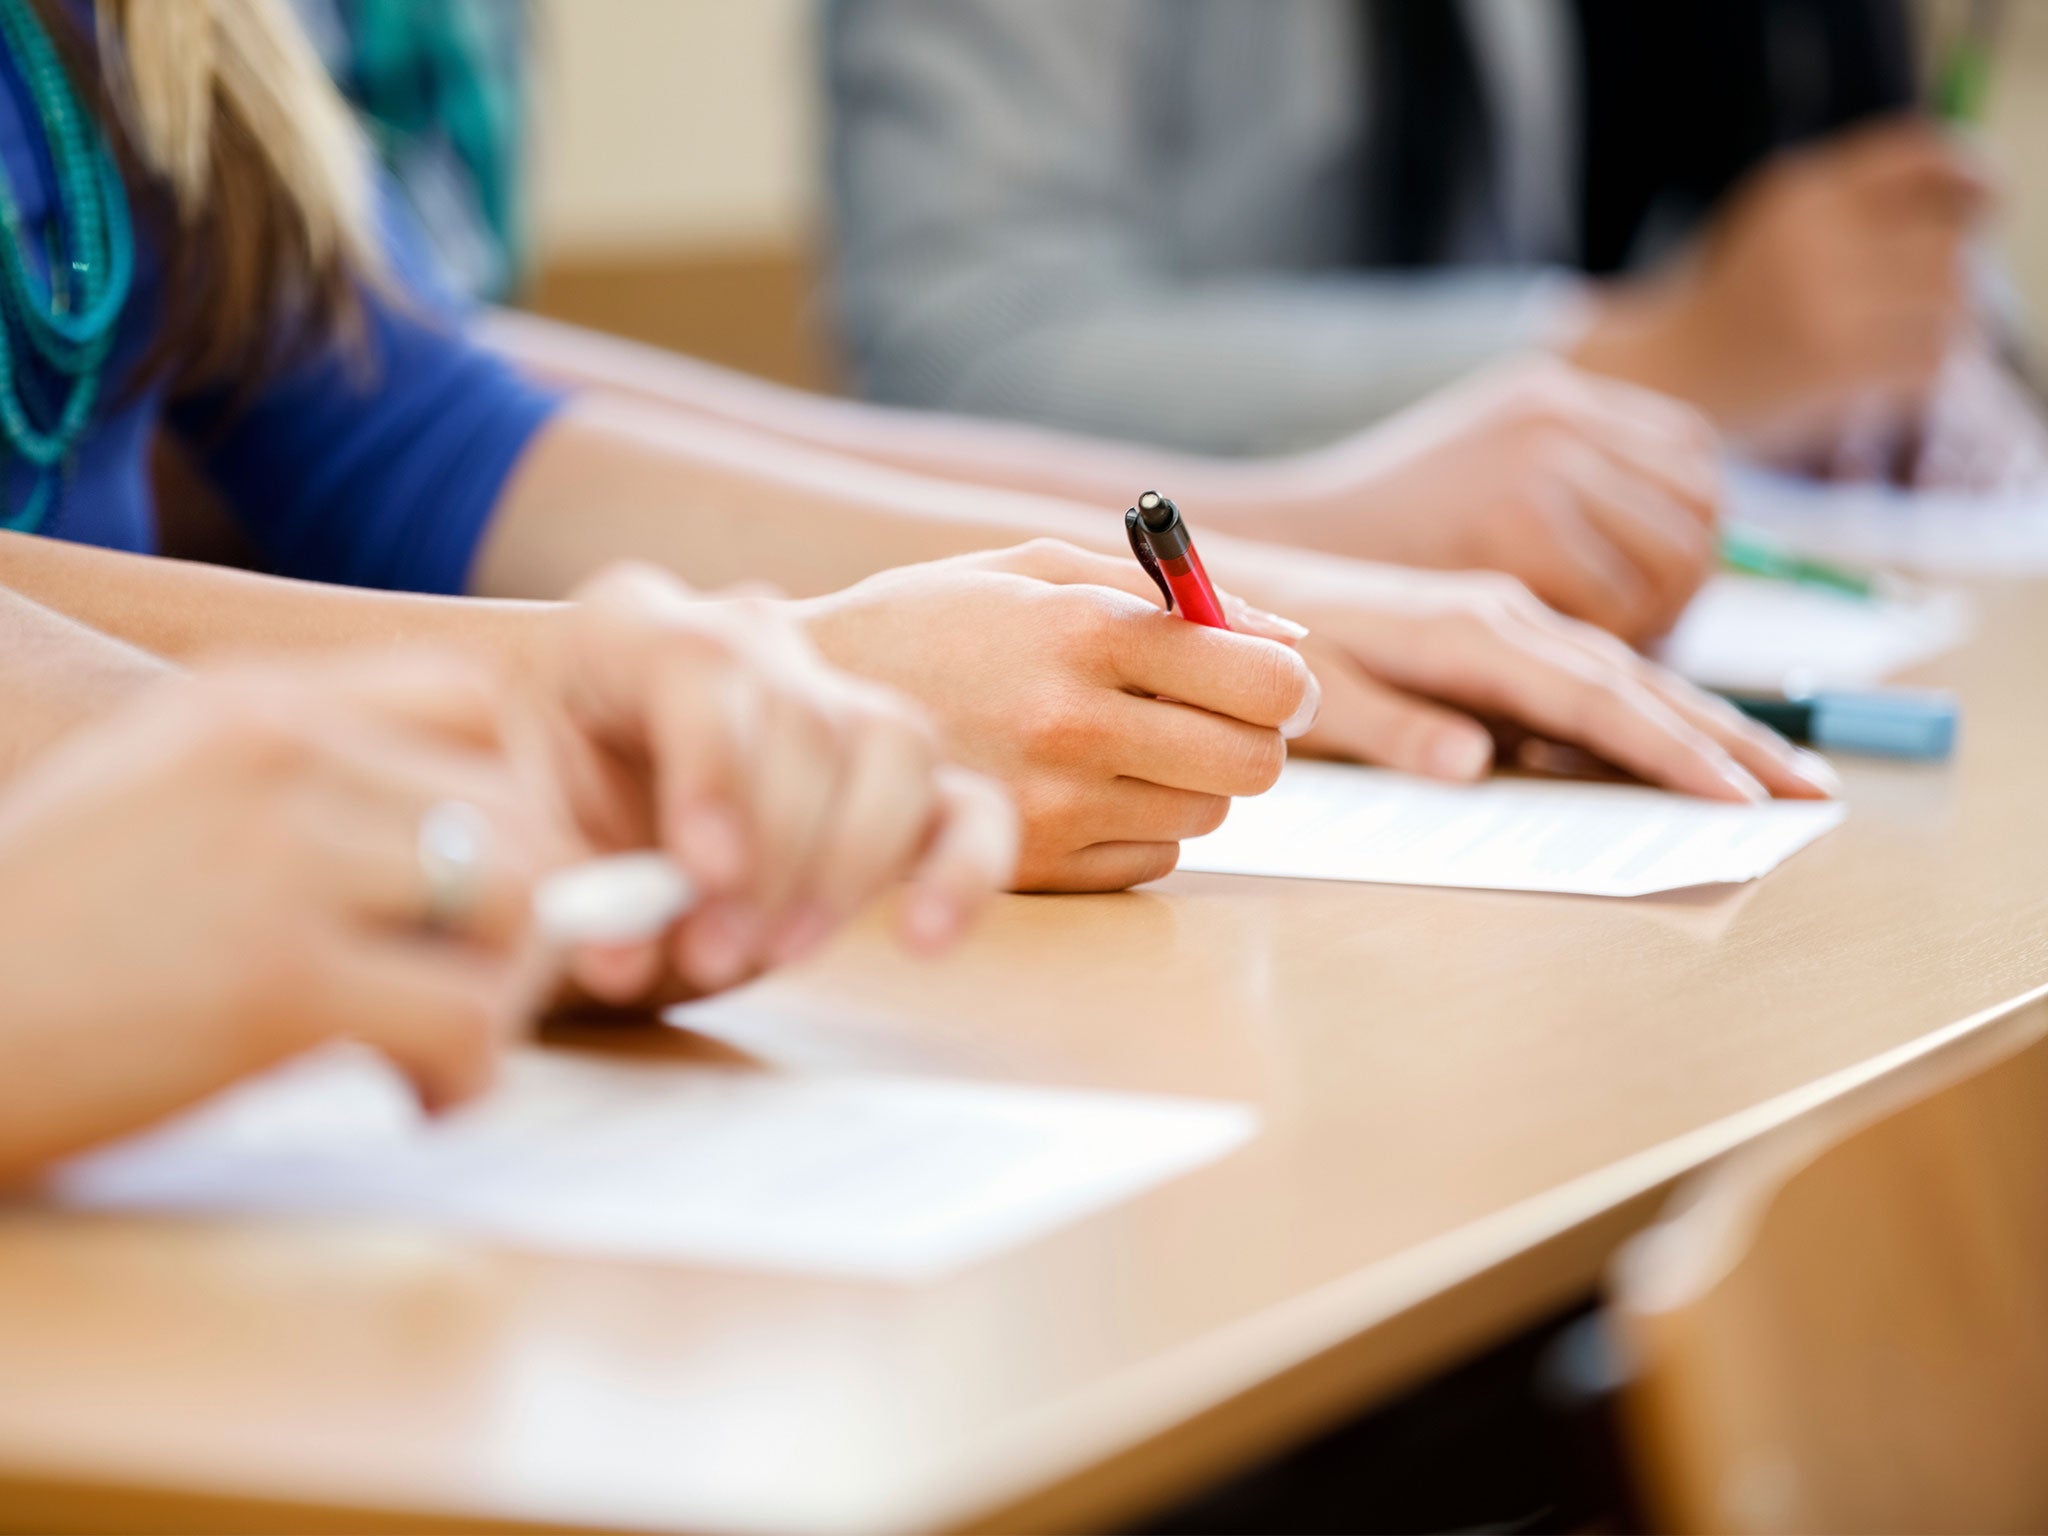 he Scottish government pledged to reduce workload pressures for teachers and remove mandatory unit assessments from both National 5 and Higher exams